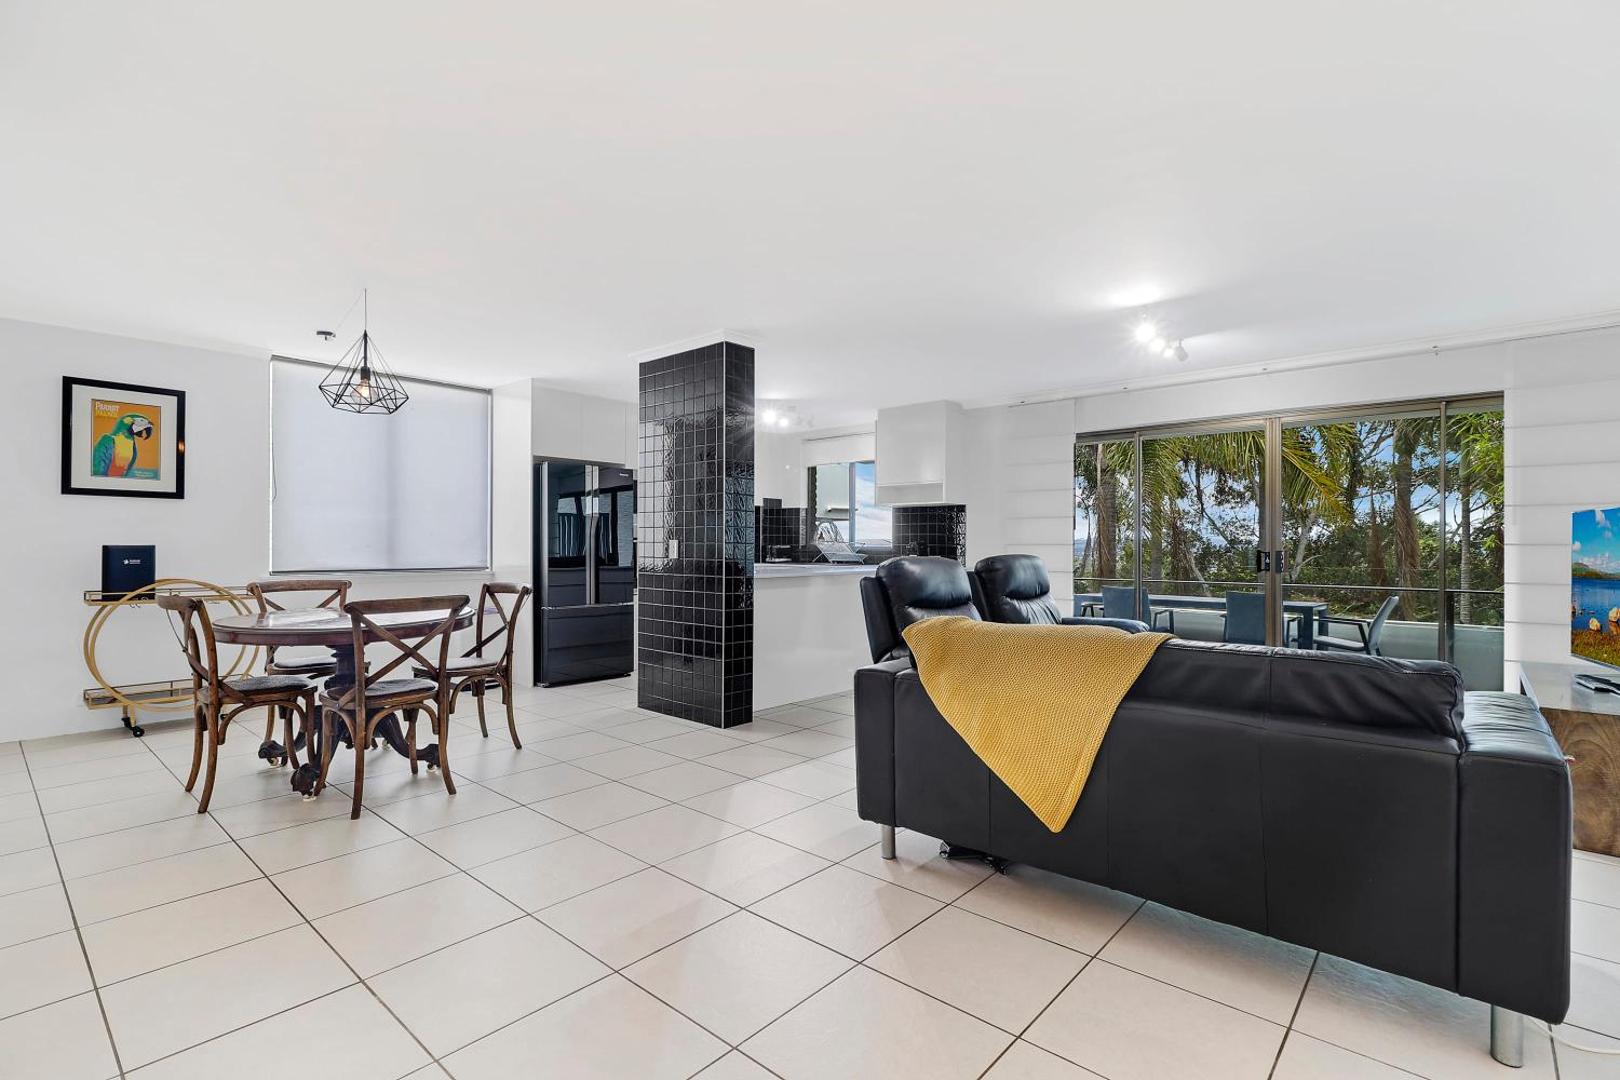 Stunning 2 BR Noosa Resort Apartment Walking Distance From Hastings Beach